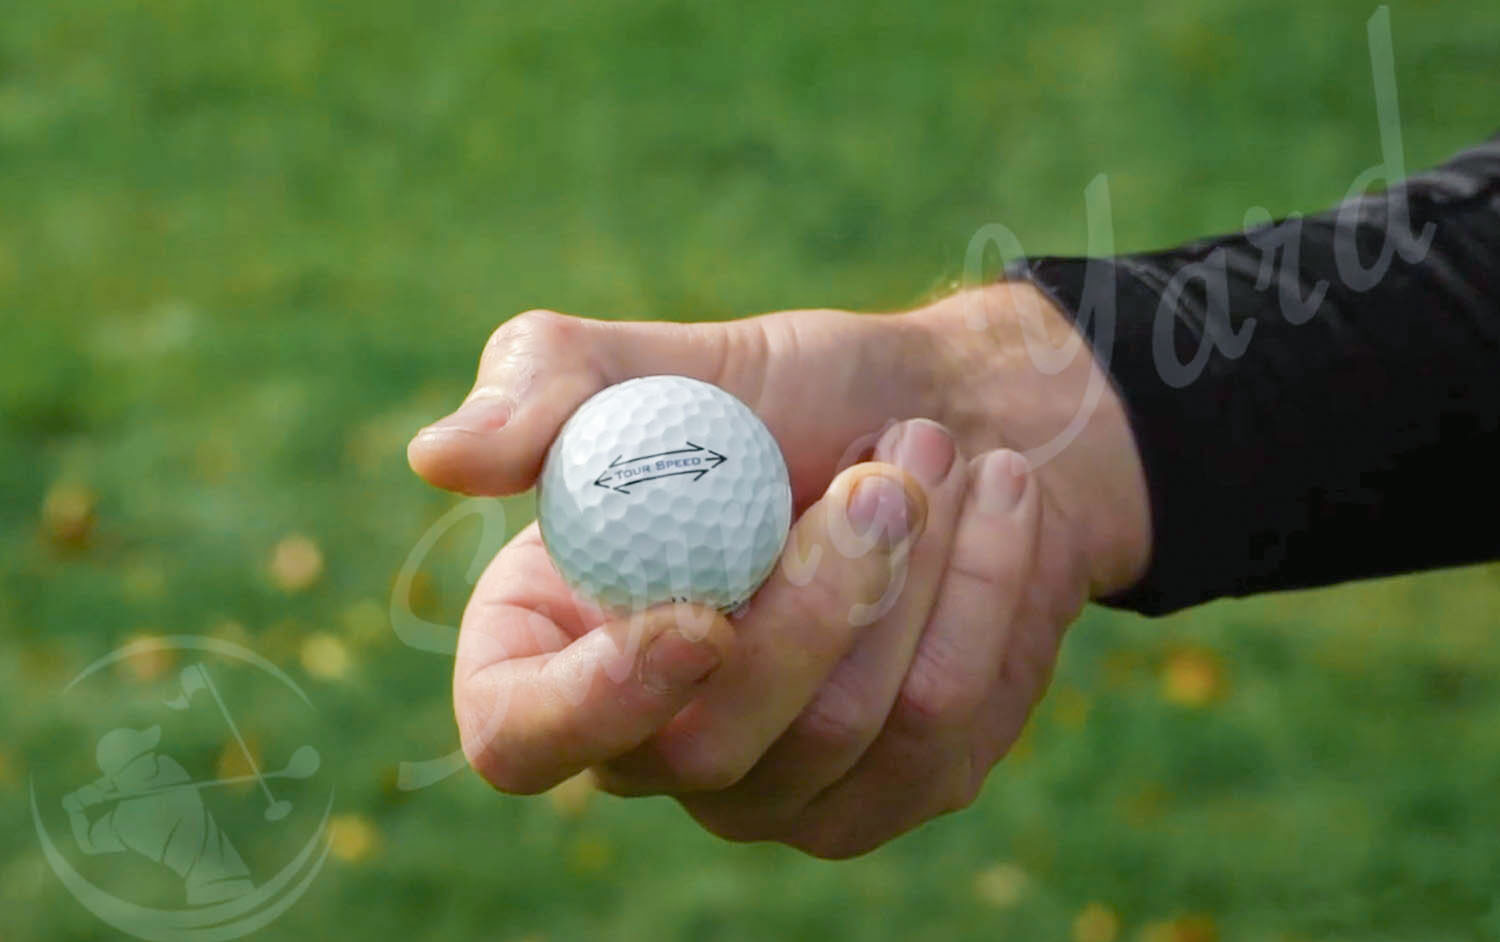 A Titleist Tour Speed ball for testing at the golf course